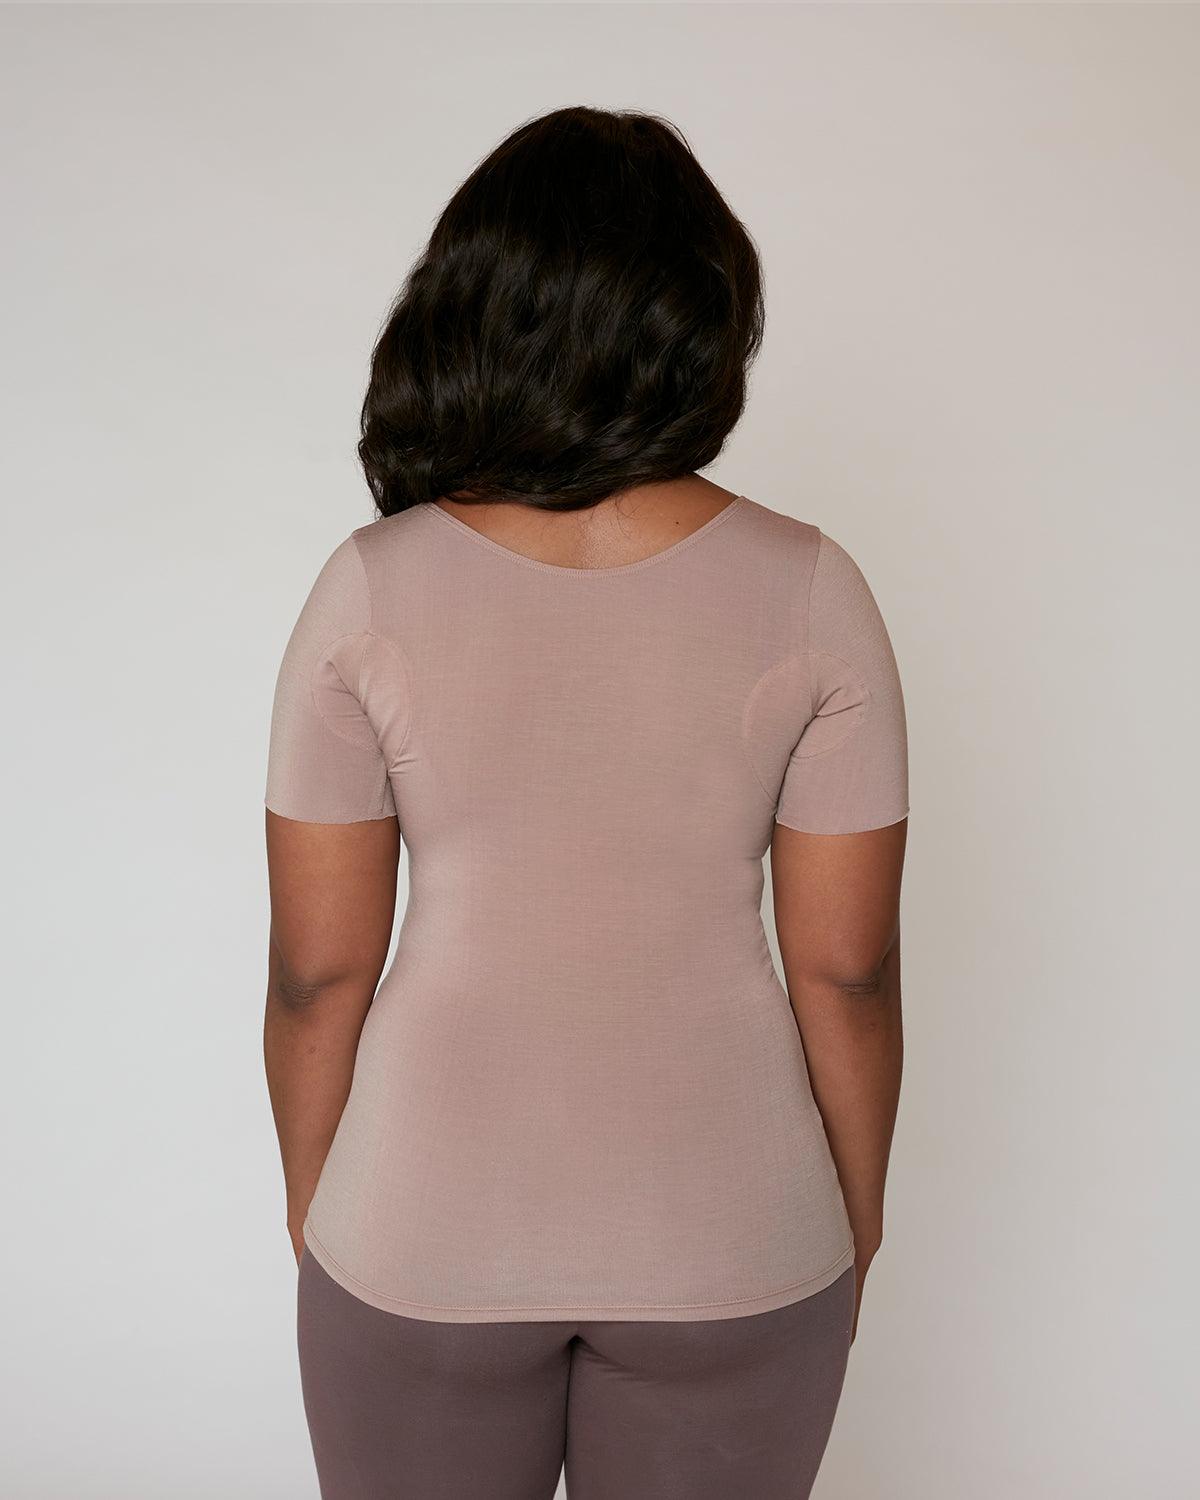 "#color_toffee| Tolu is 5'7.5" and wears a size M